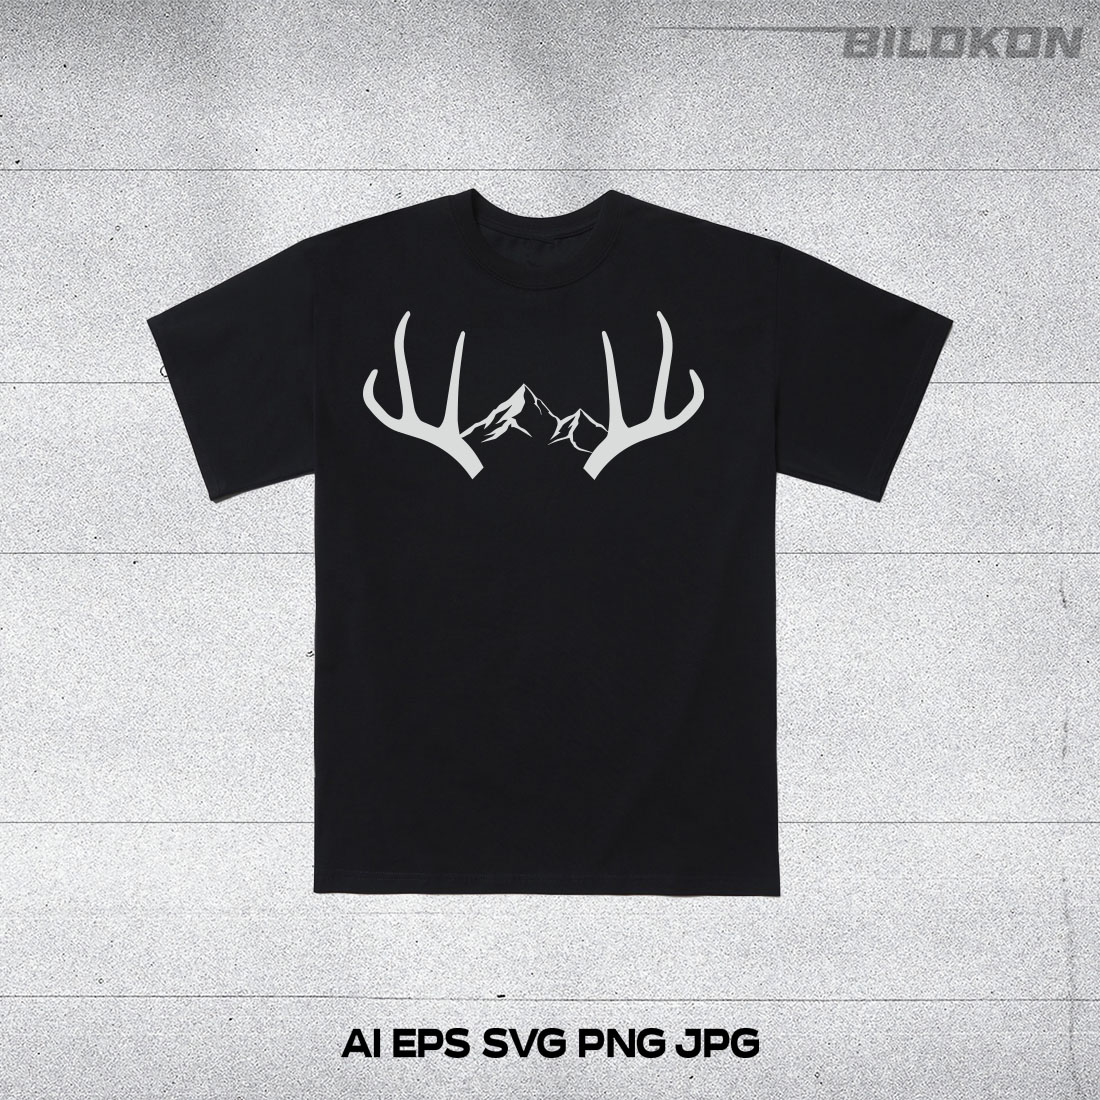 Black t - shirt with white deer antlers on it.